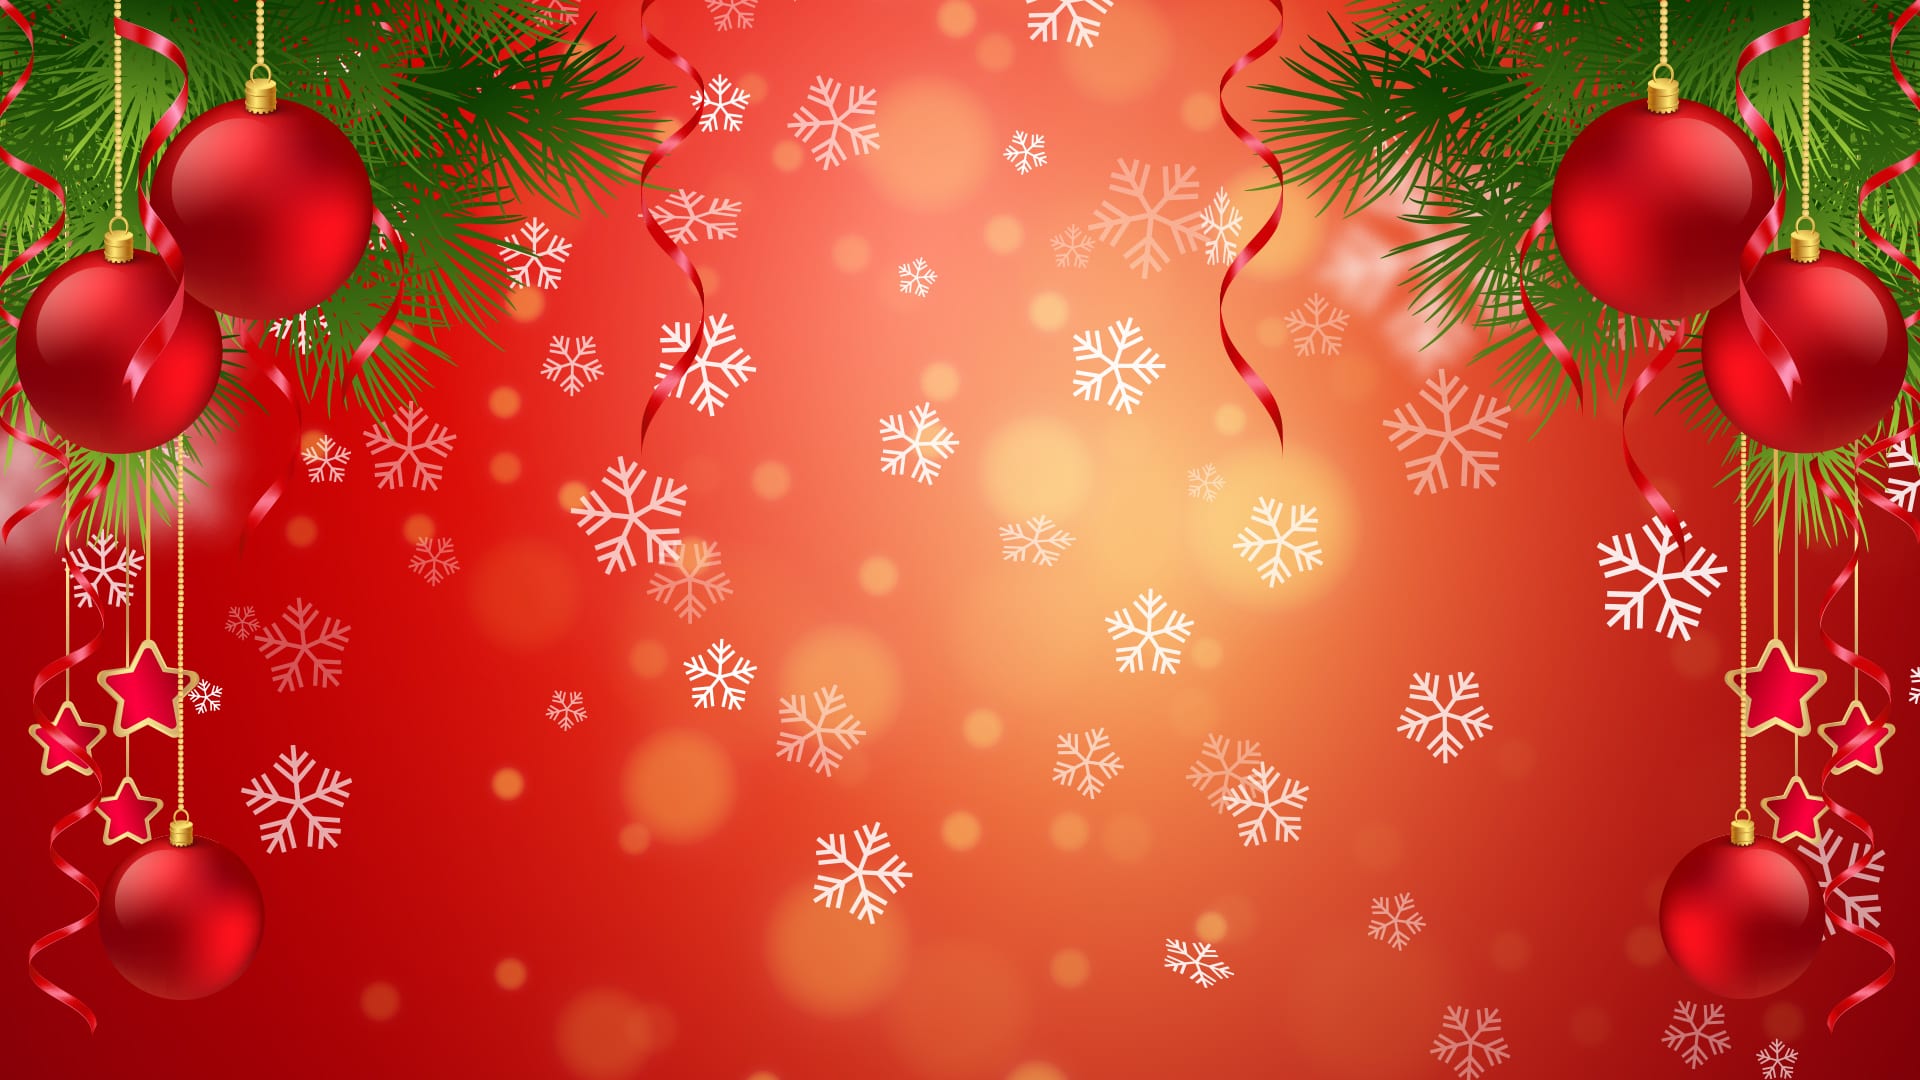 20 Beautiful Christmas Wallpapers and Backgrounds in Full